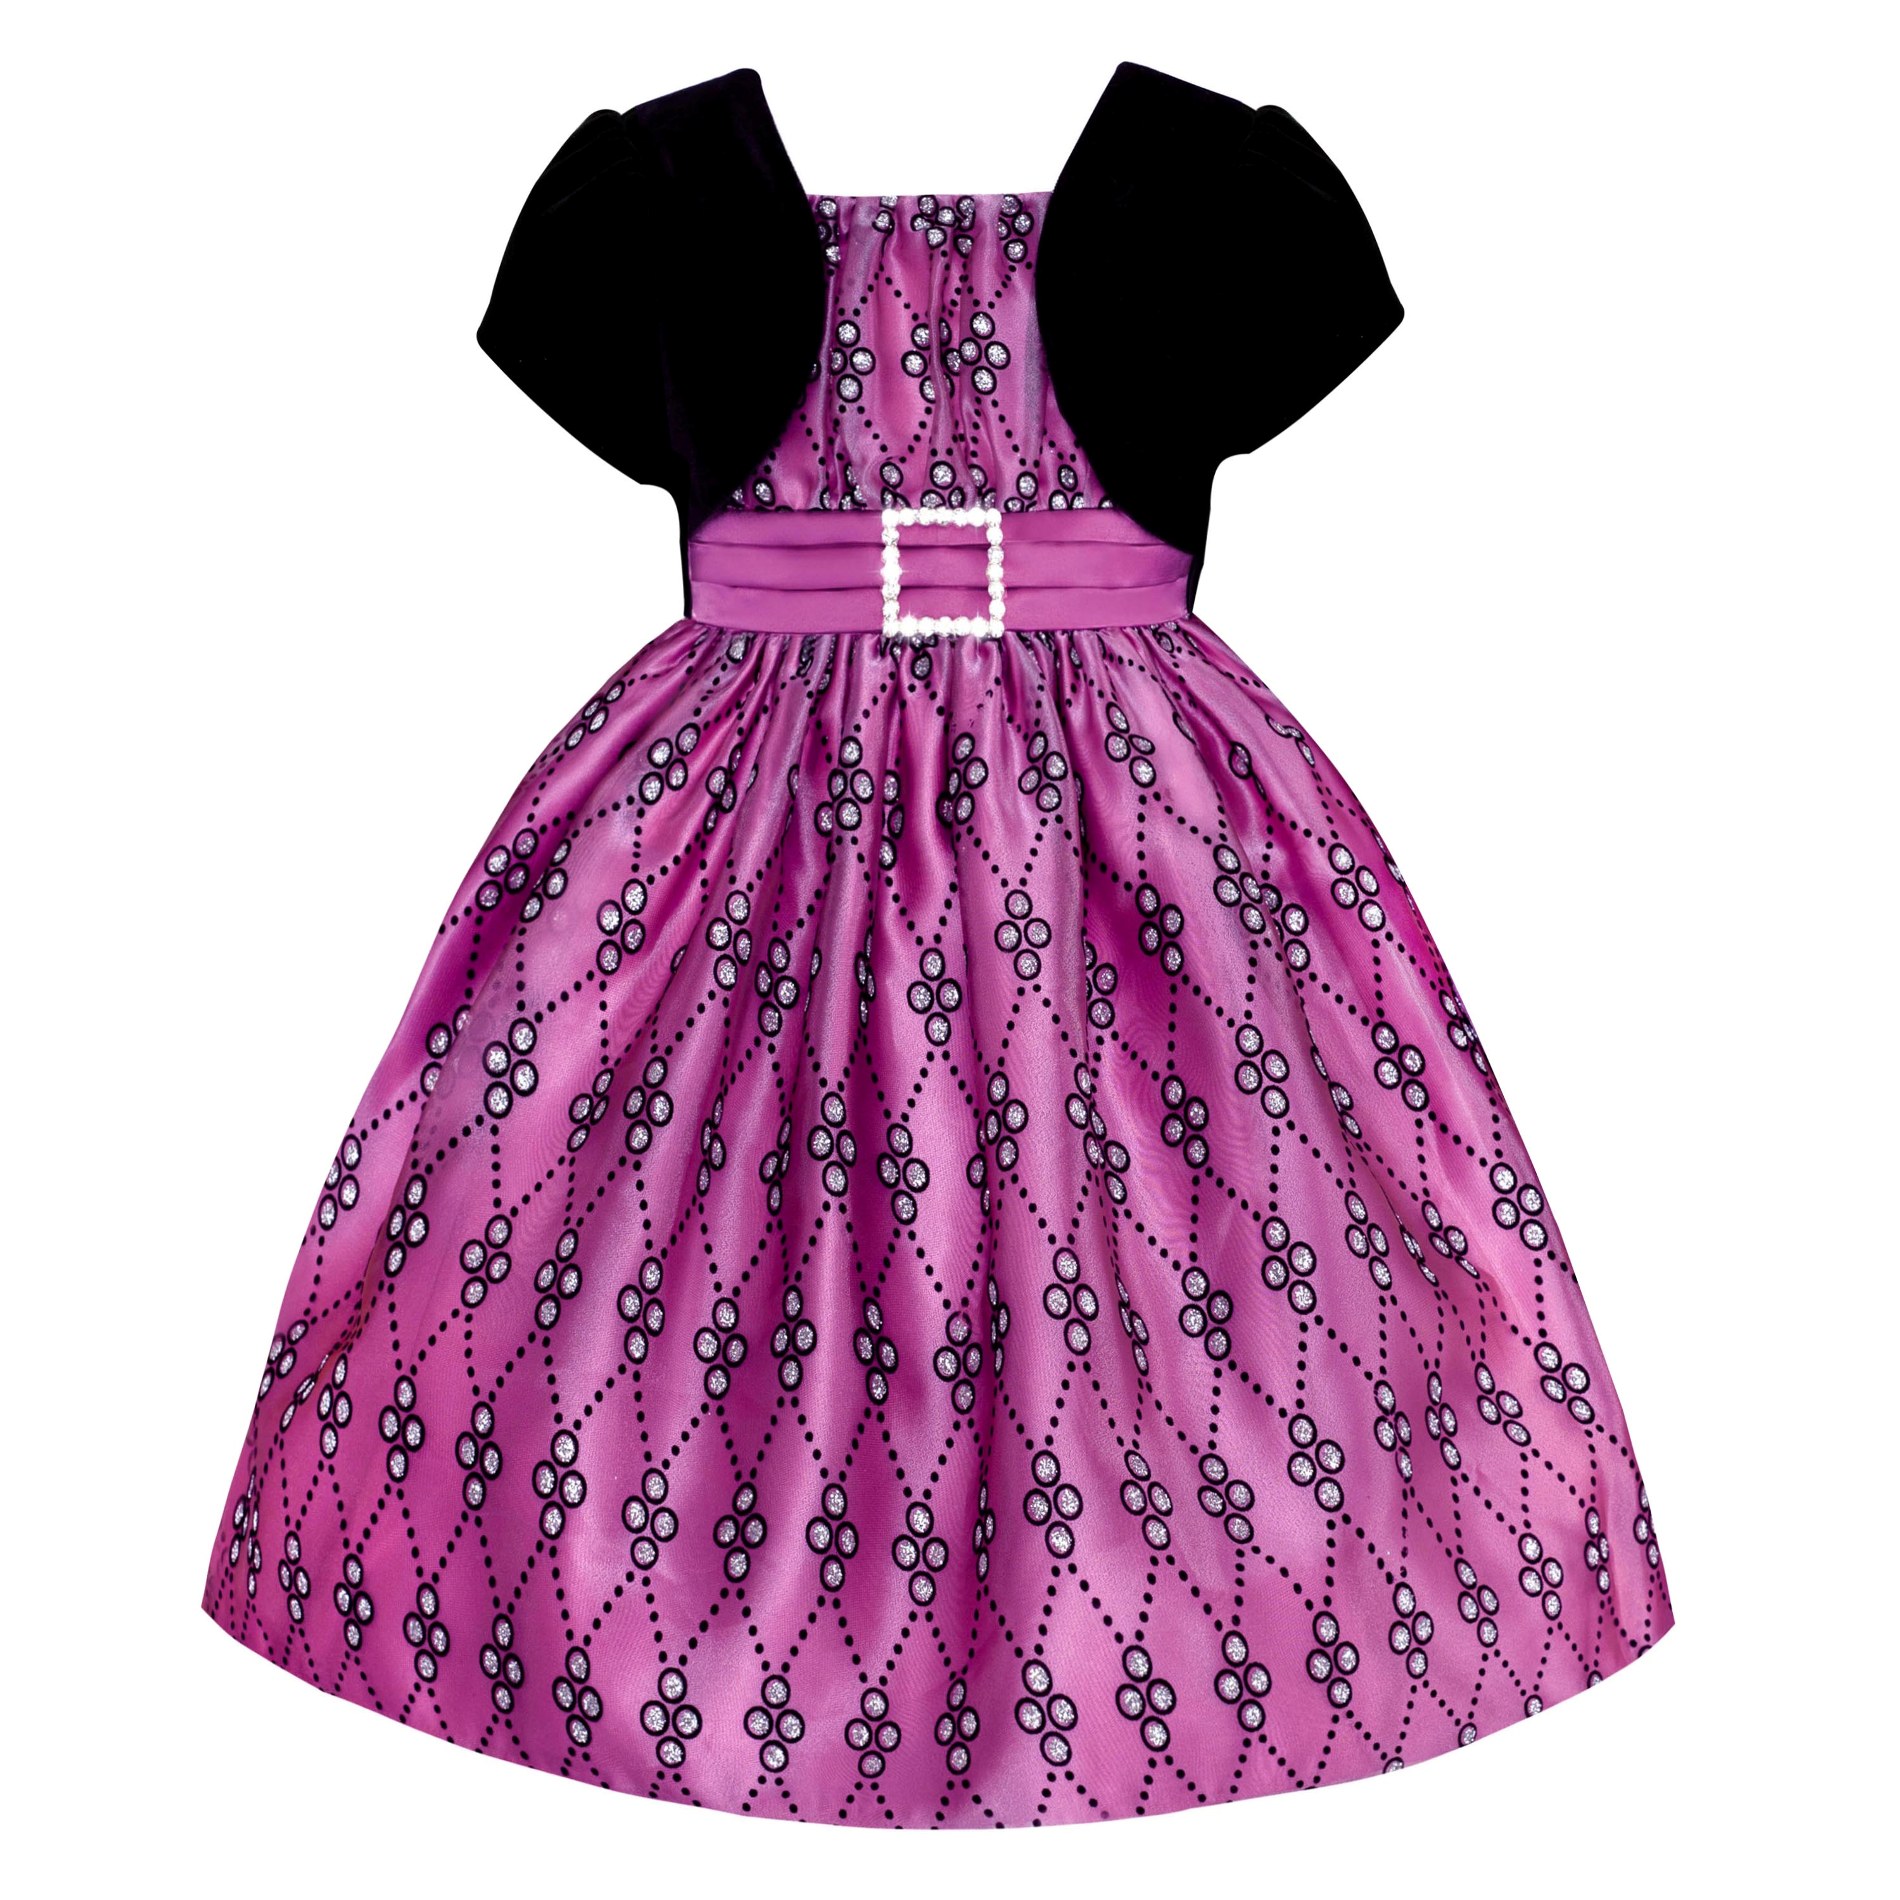 Love Girl's Layered-Look Party Dress - Dot Print